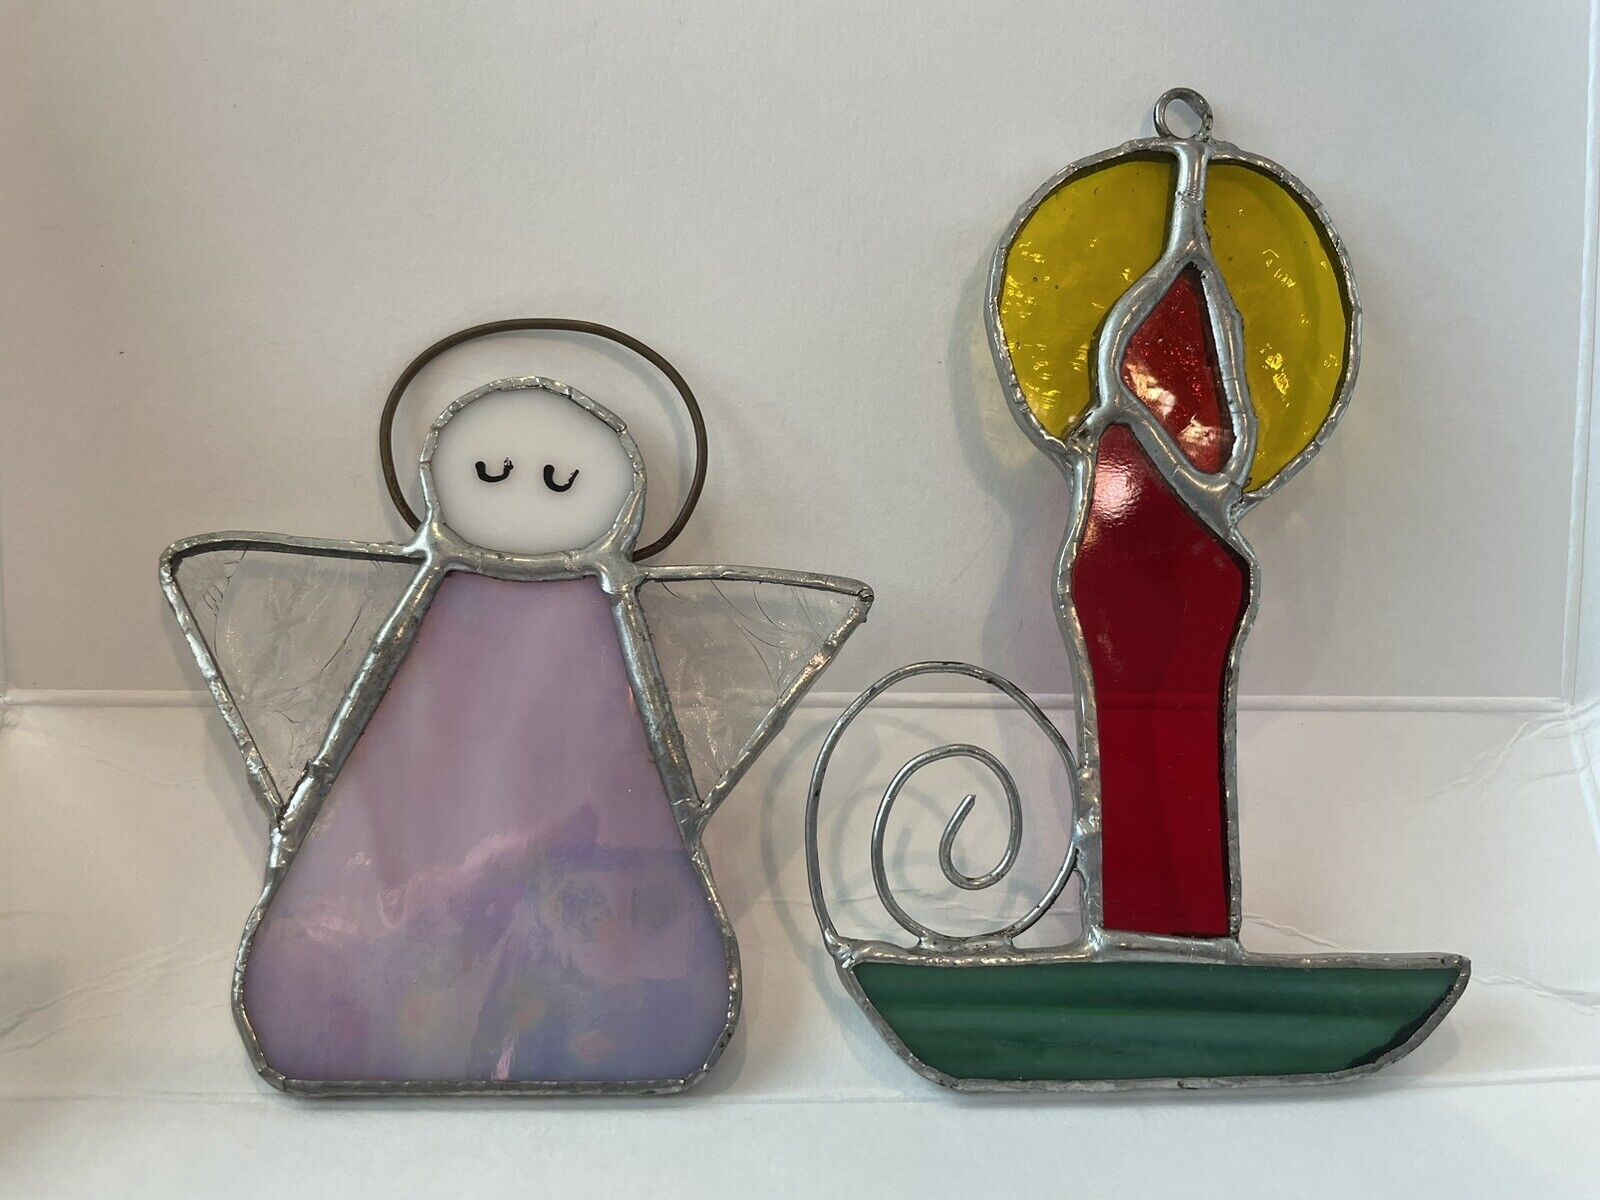 2 Vtg Handmade Stained Glass Suncatcher Christmas Ornaments Candle Angel